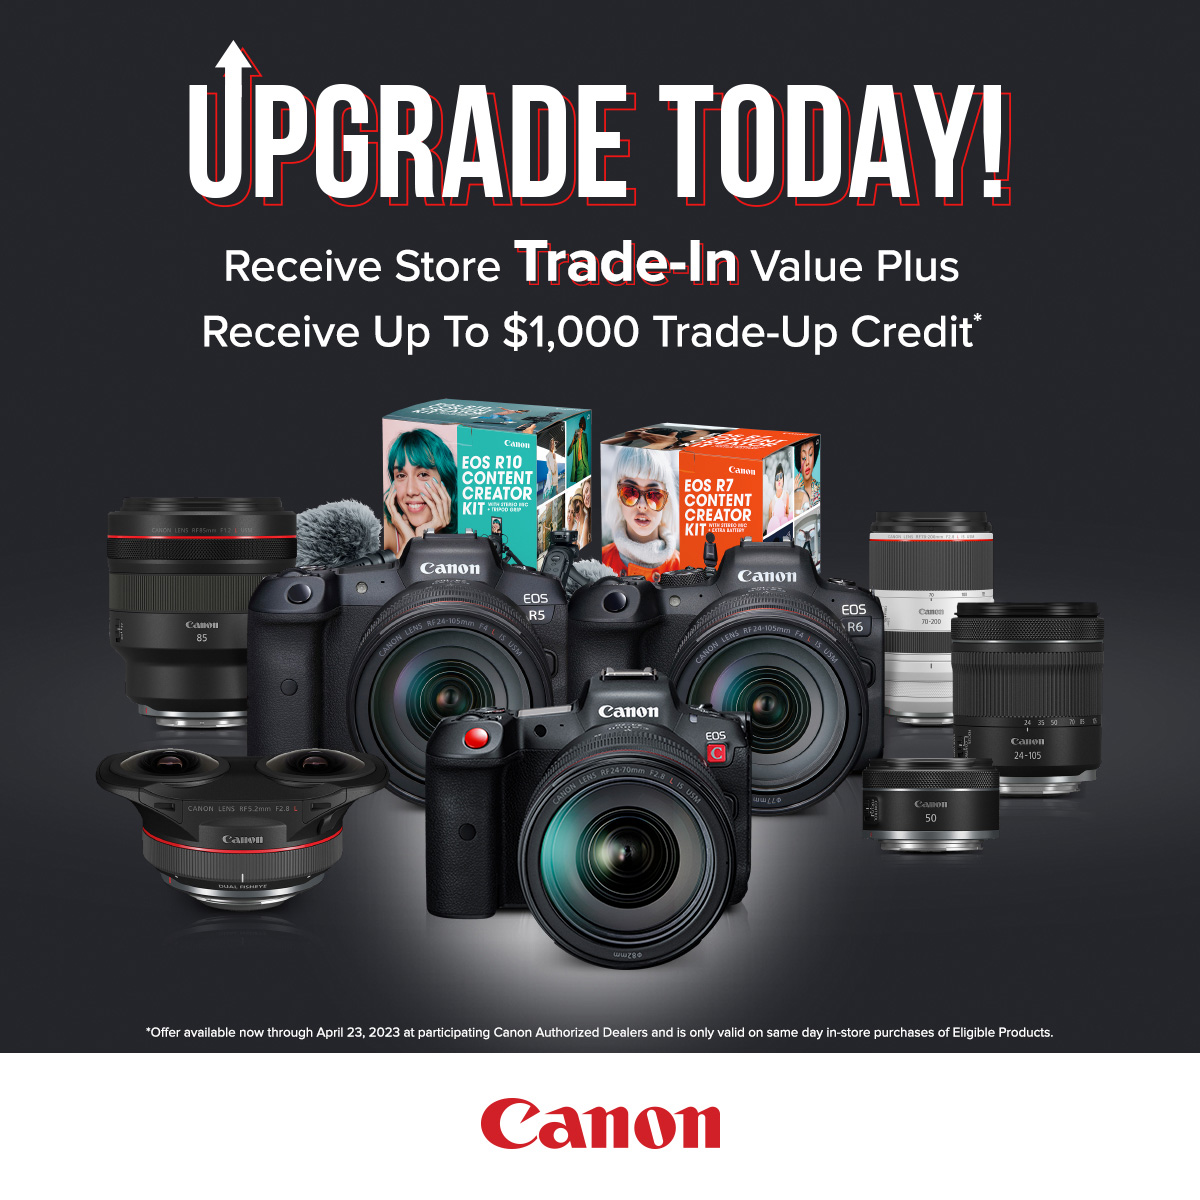 benzine Willen Bulk CANON IN-STORE TRADE-IN PROMOTION - Texas Media Systems